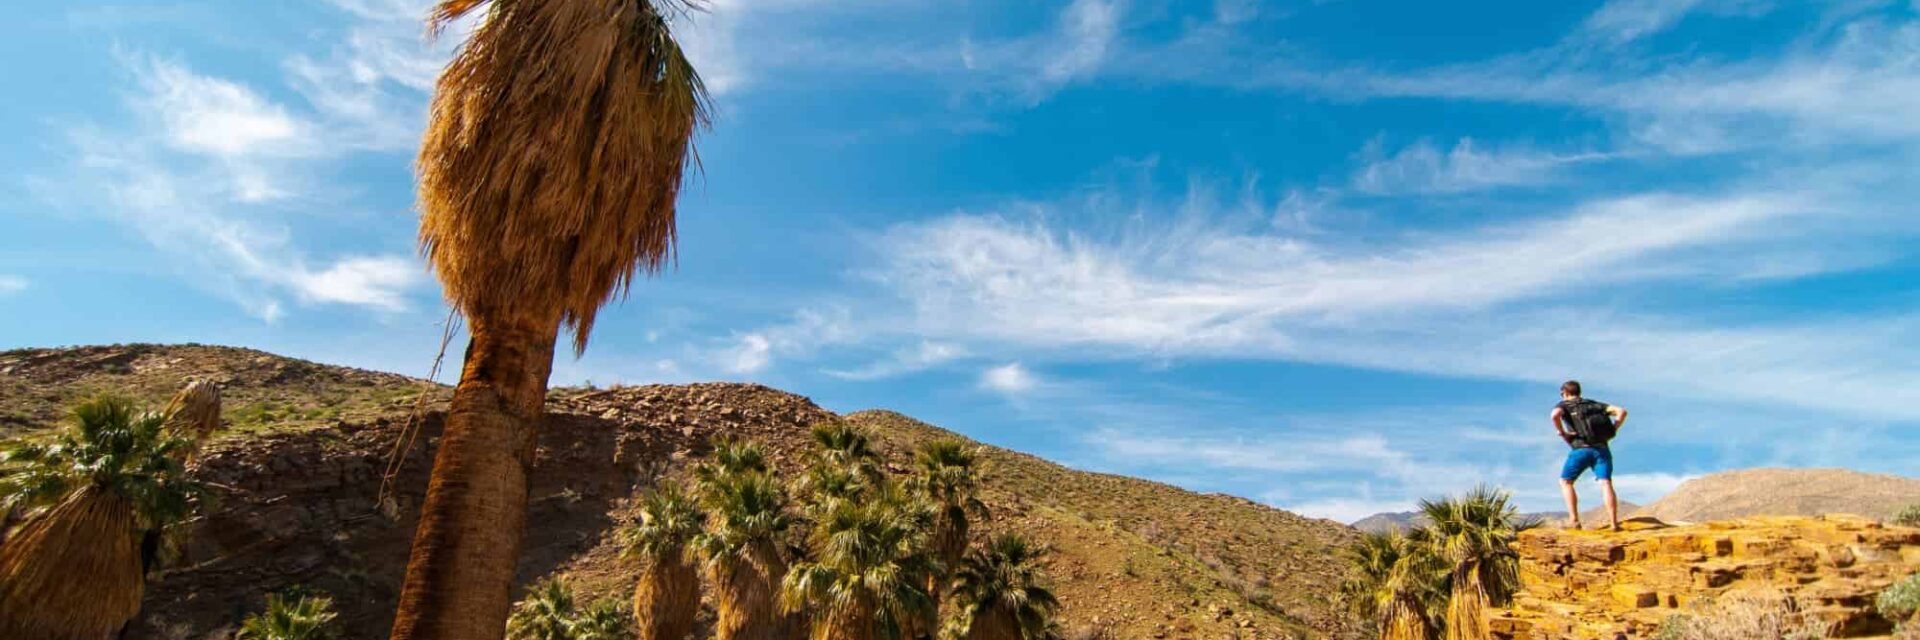 hiking trails in palm springs area